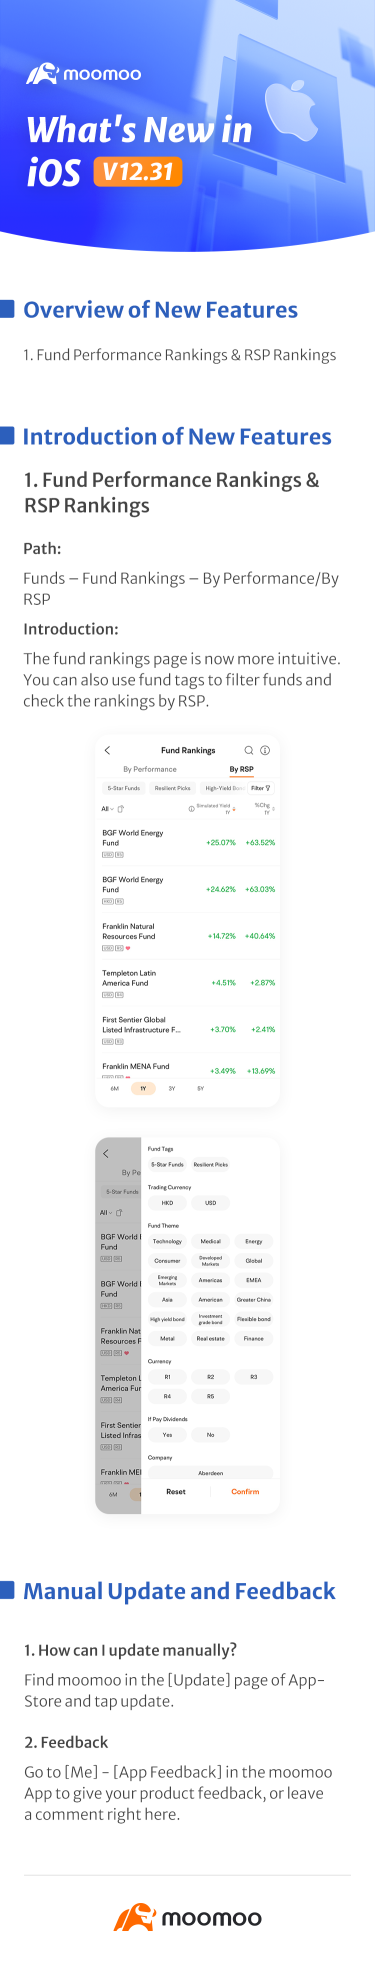 What's New: Fund performance & RSP rankings optimized in iOS v12.31